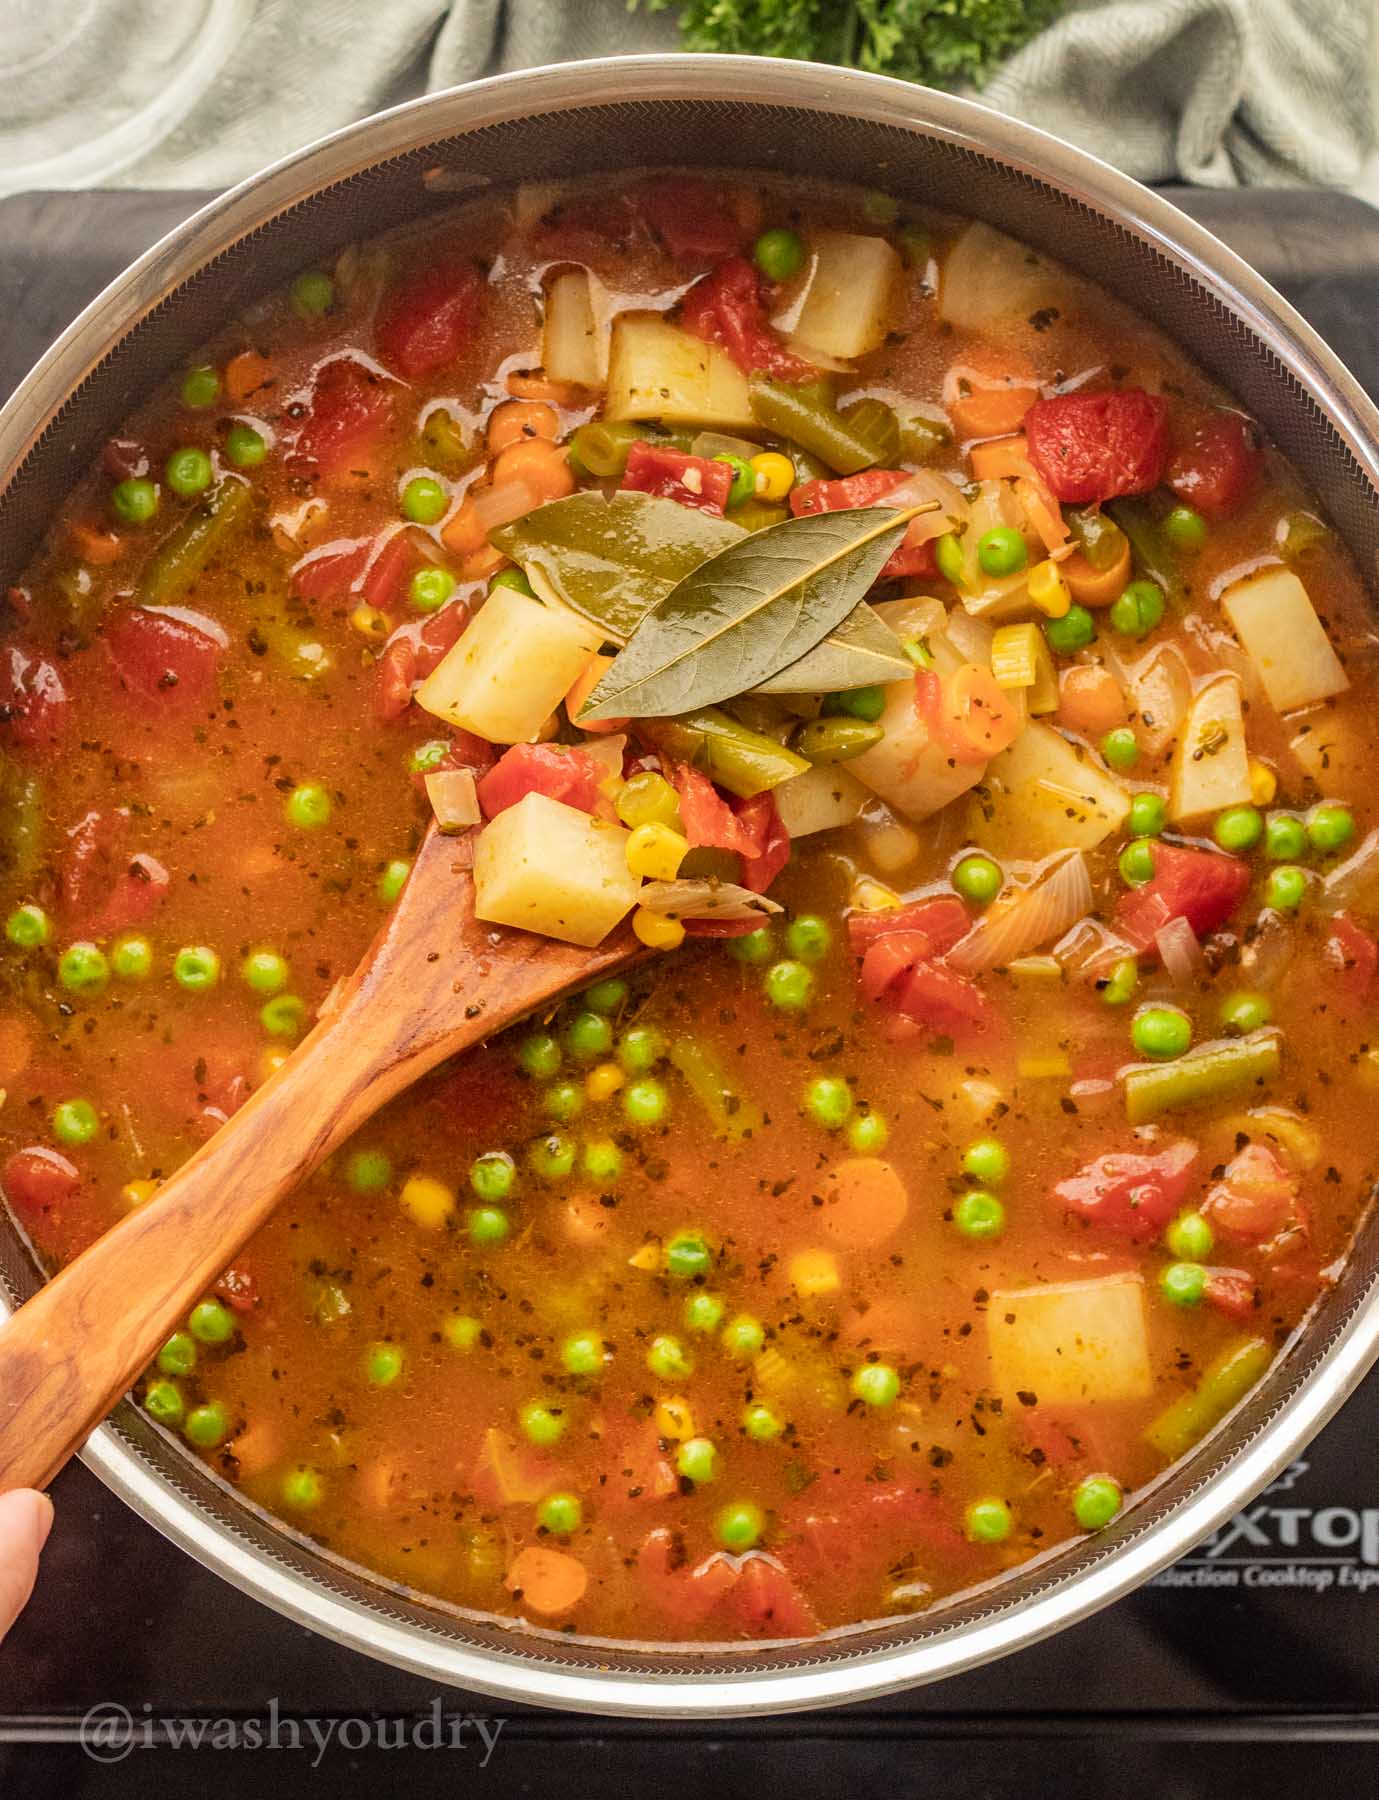 Large pot filled with vegetable soup and ladle.